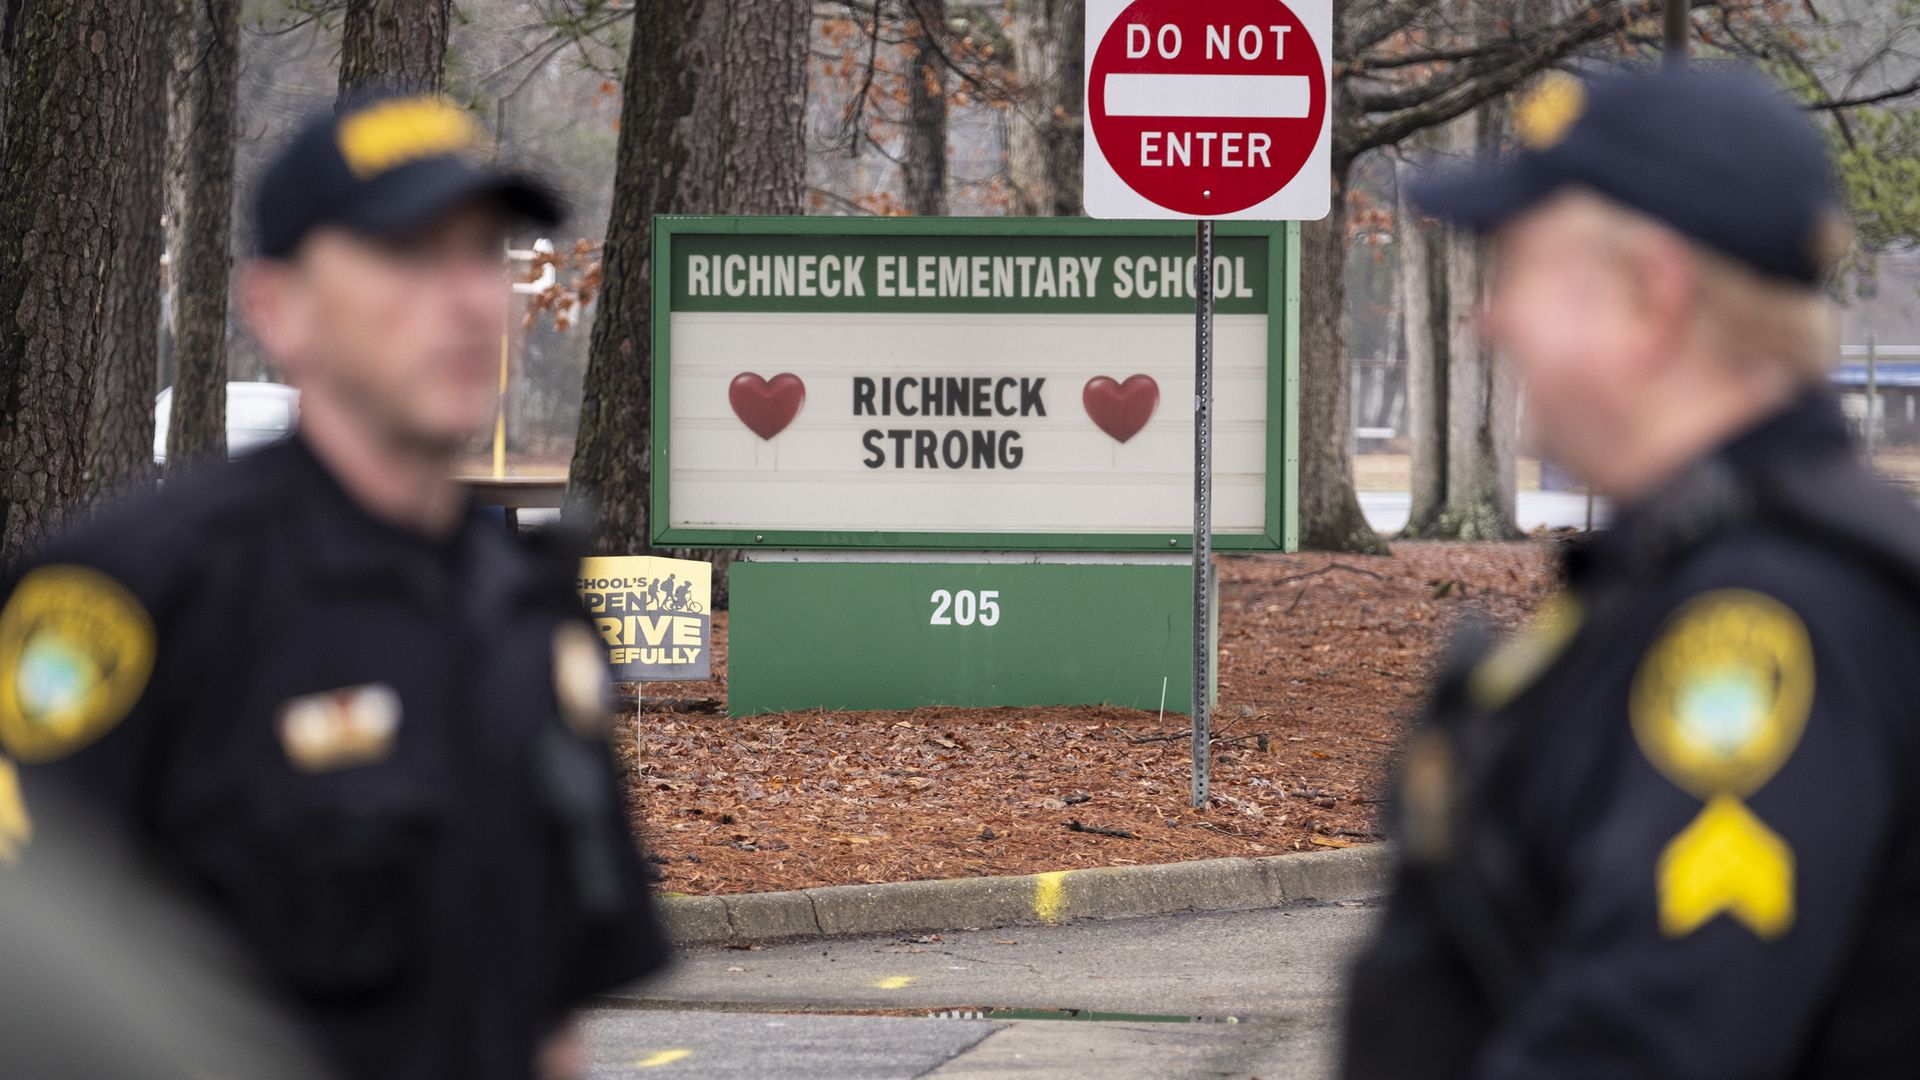 Students return to Richneck Elementary in Newport News, Virginia, on Monday, Jan. 30, 2023, for the first time since a 6-year-old shot teacher Abby Zwerner three weeks prior.